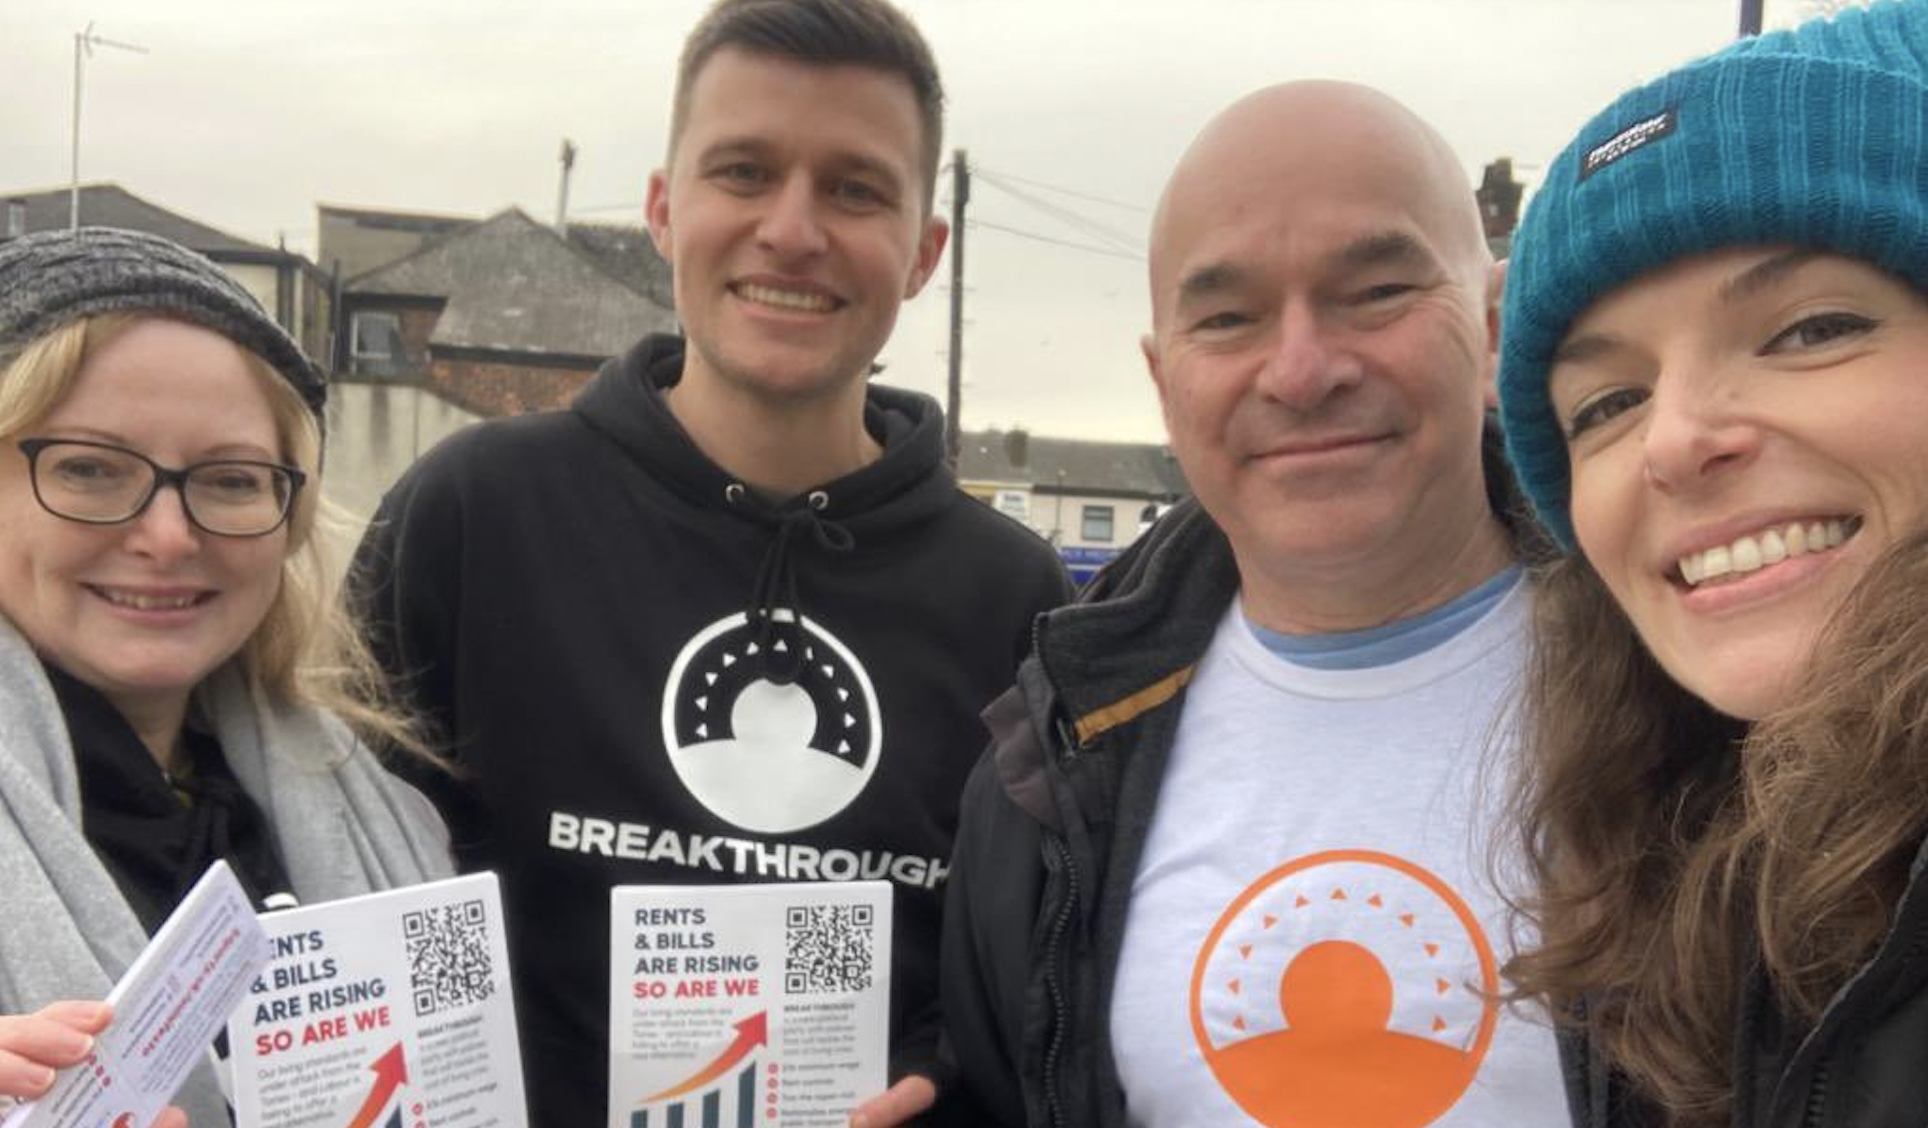 Breakthrough Party launches biggest Weekend of Action yet